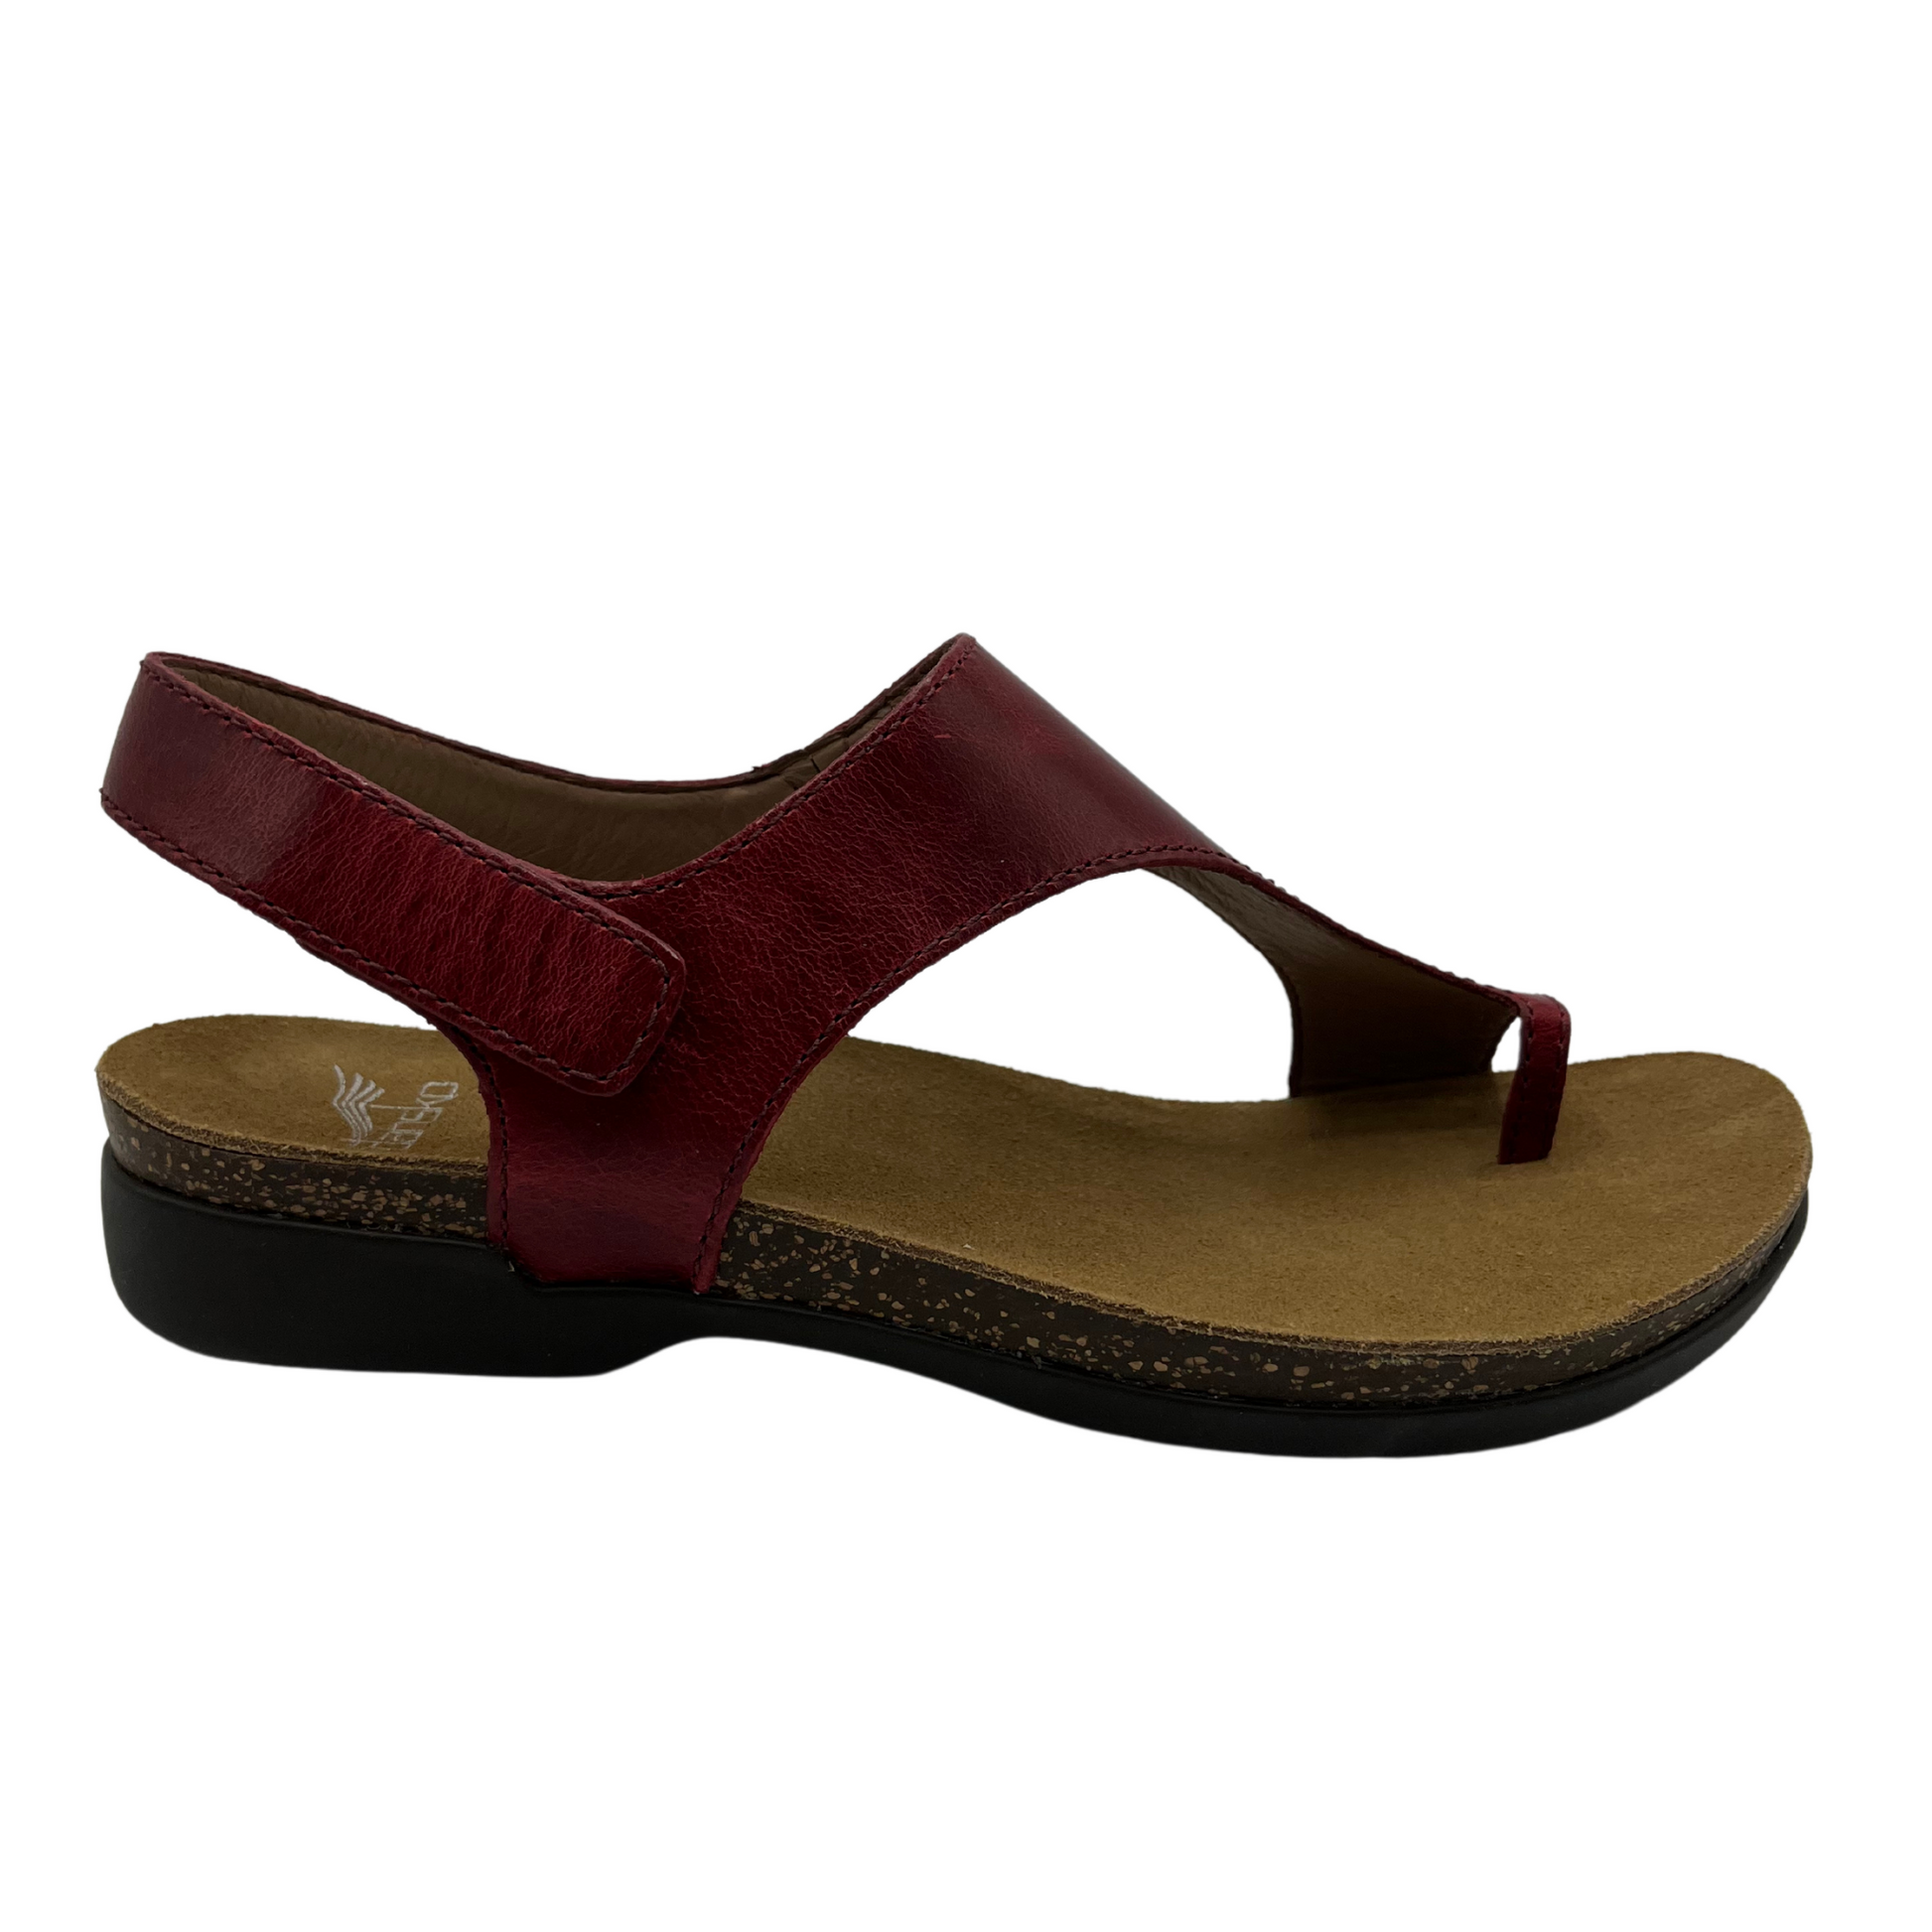 Right facing view of dark red leather sandal with velcro ankle strap and thin toe strap